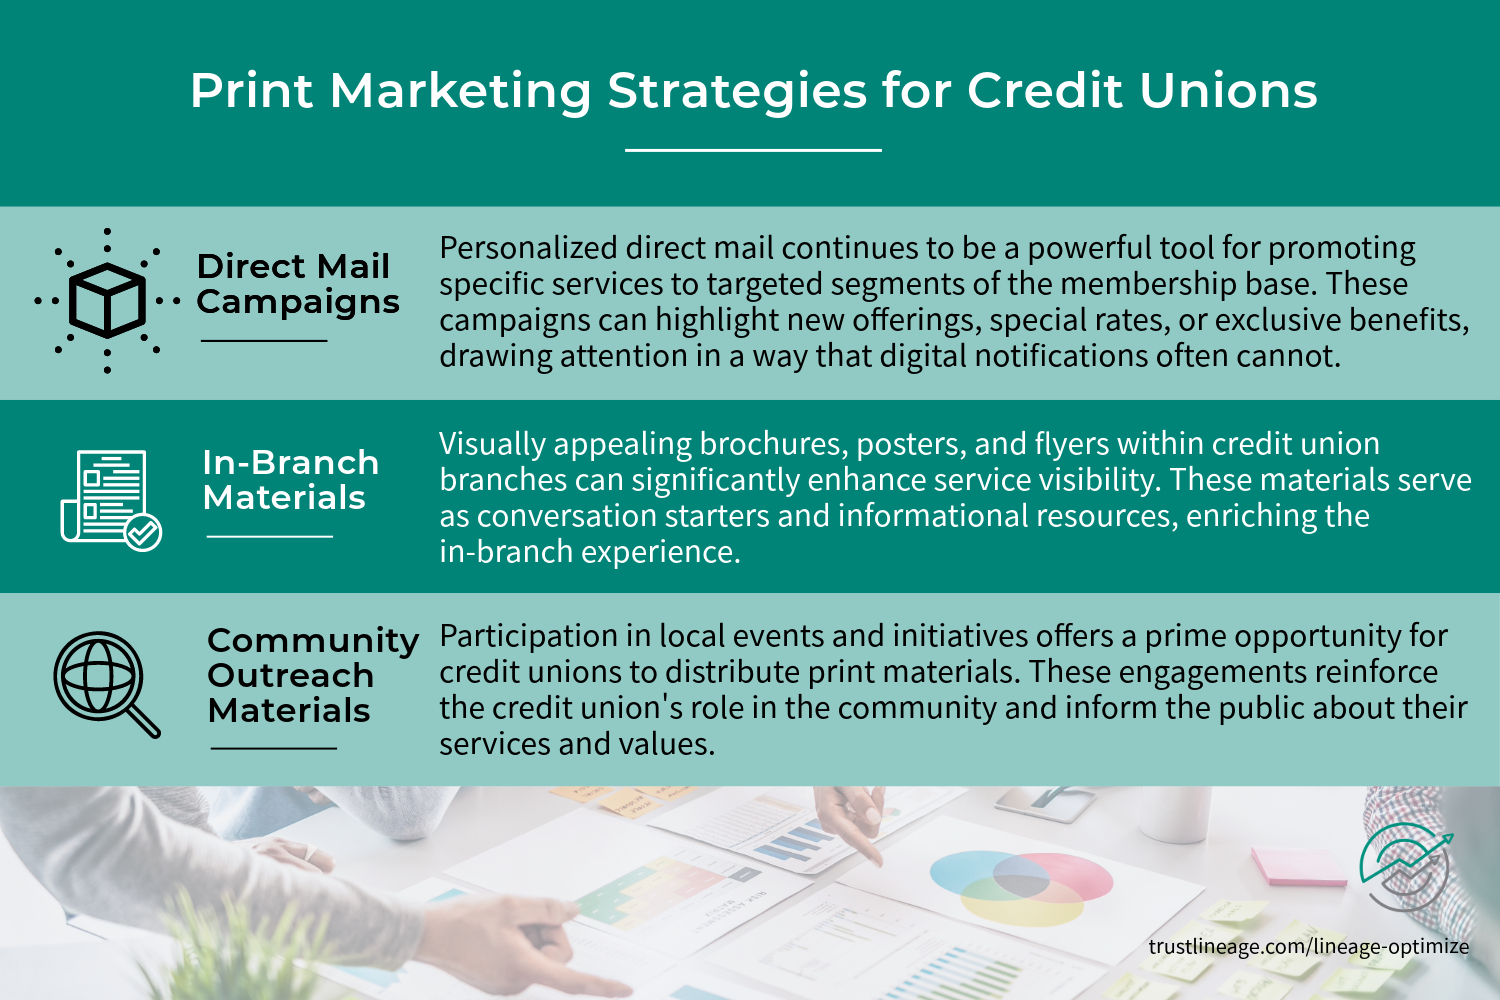 Using Print Technology for Effective Print Marketing Strategies in Credit Unions